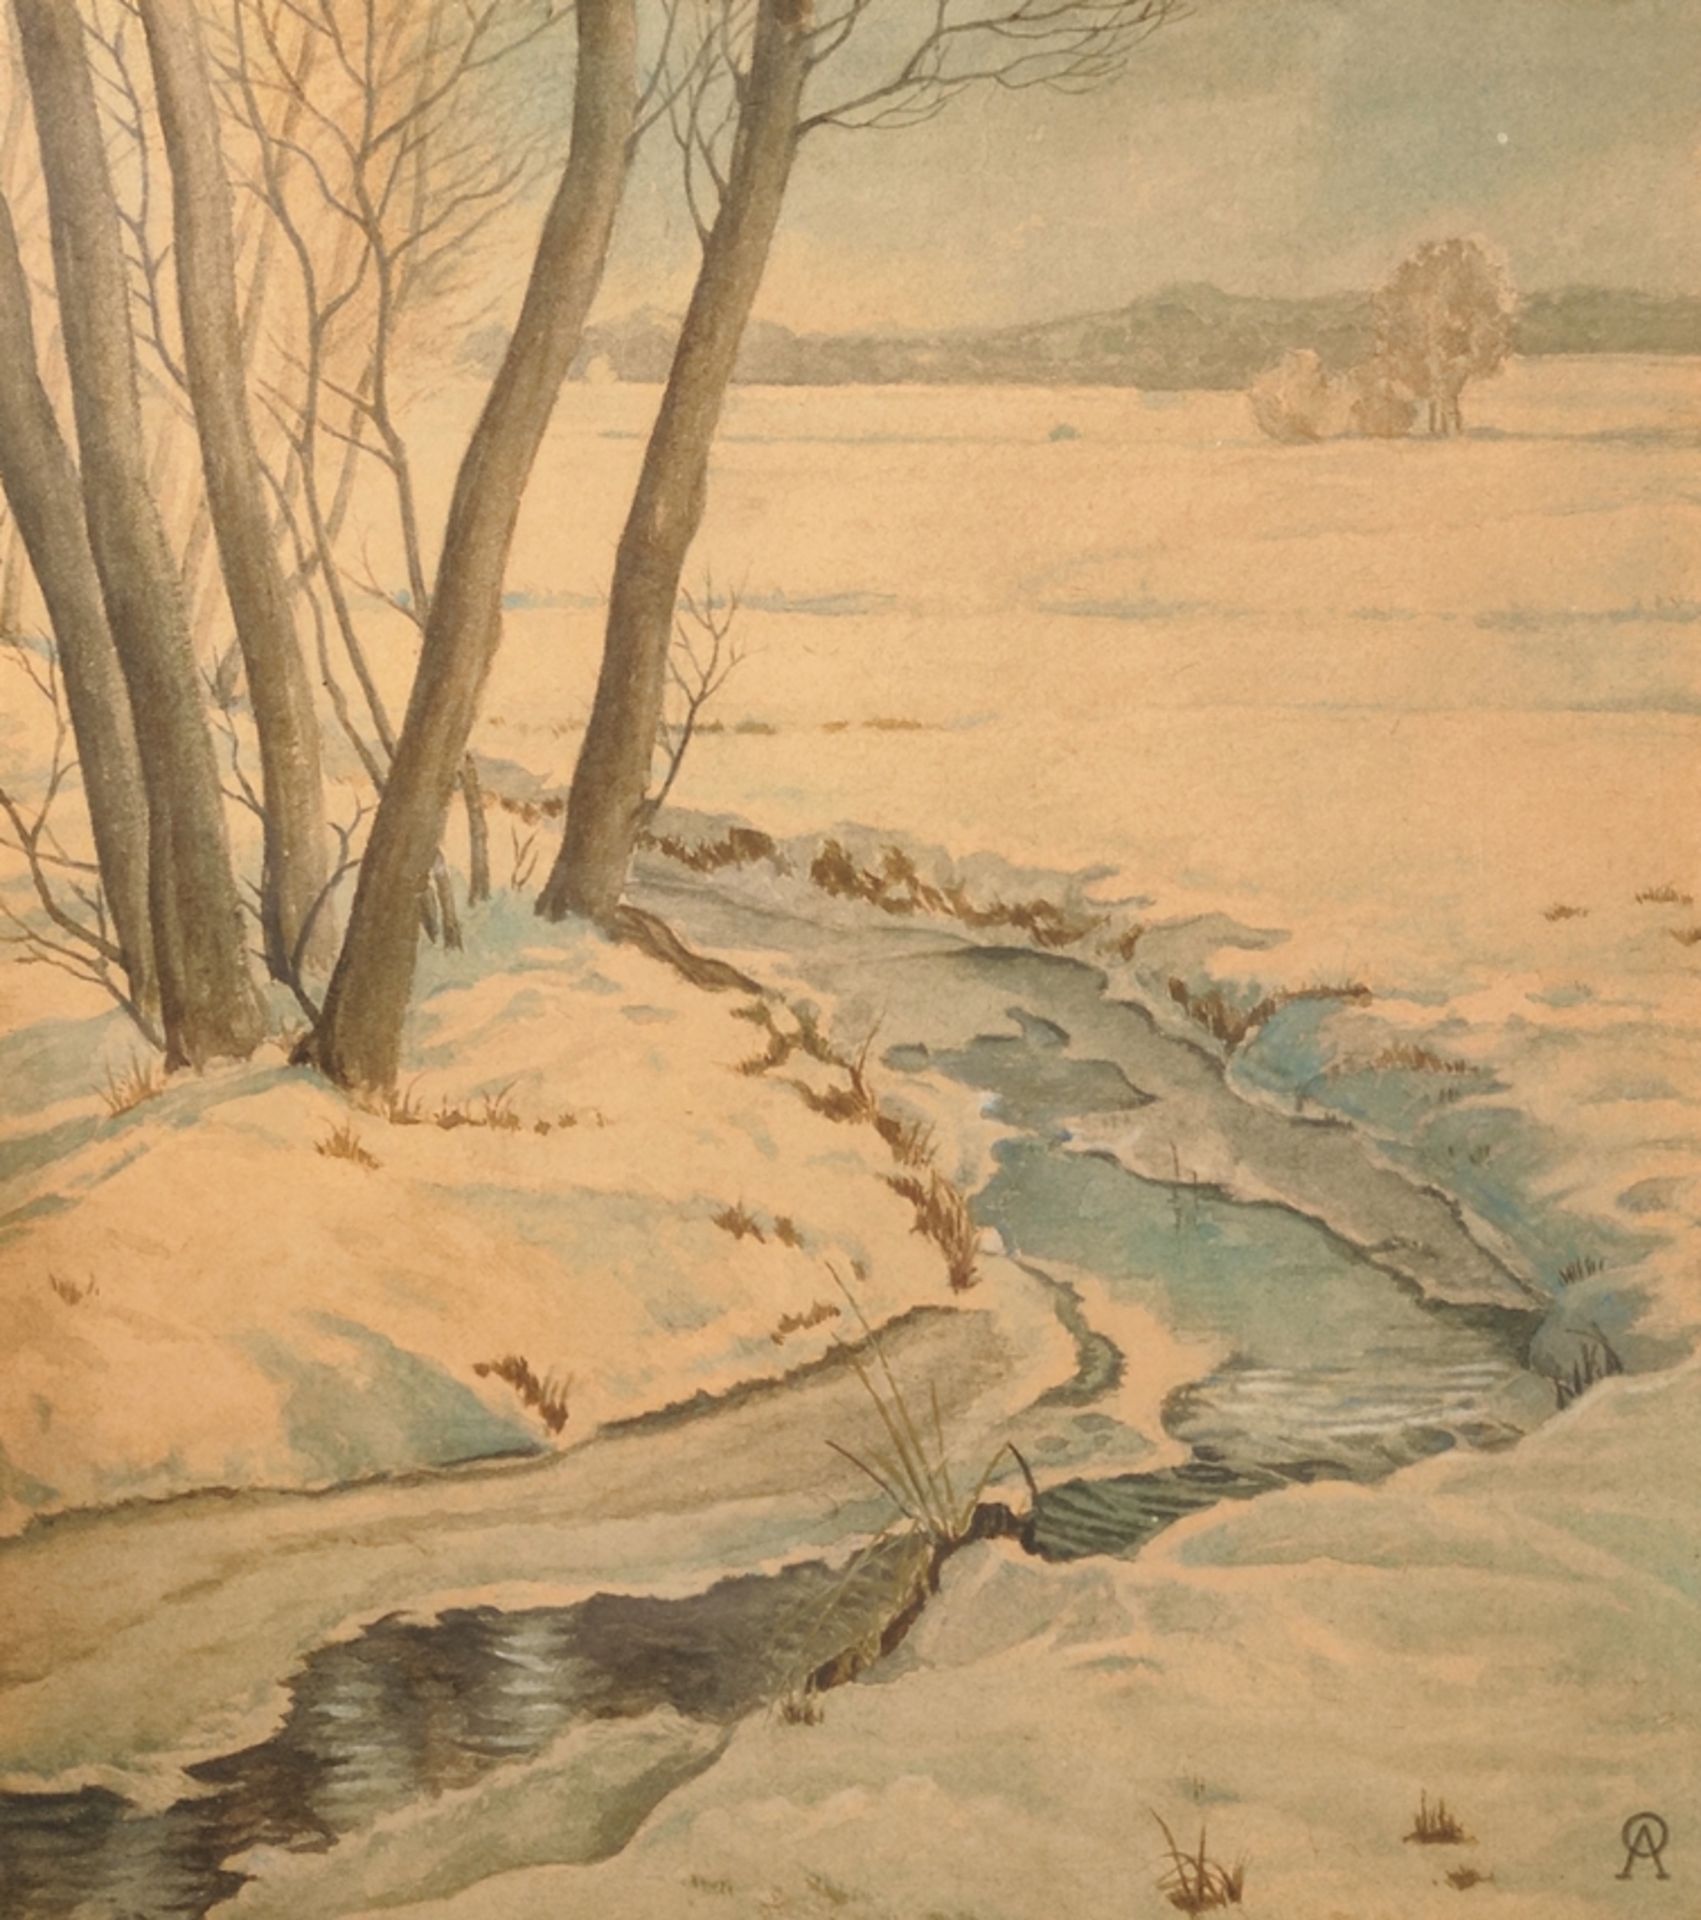 Monogramist OA (20th century) "Small stream in winter", watercolor on paper, monogrammed lower righ